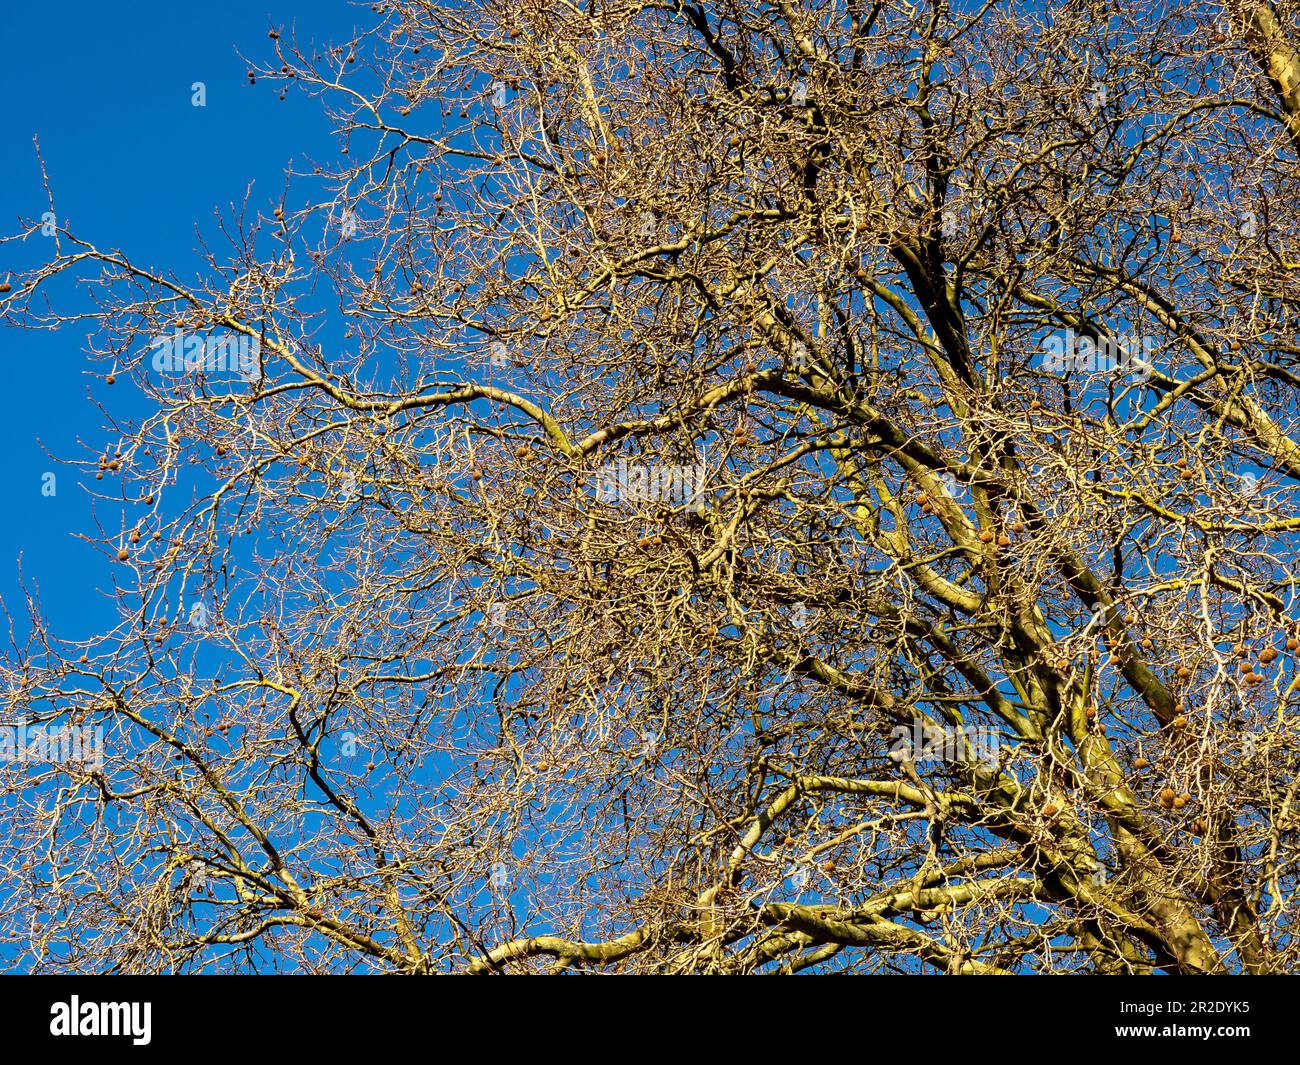 Bare branches of a deciduous tree seen against a clear blue sky on a sunny day. Stock Photo